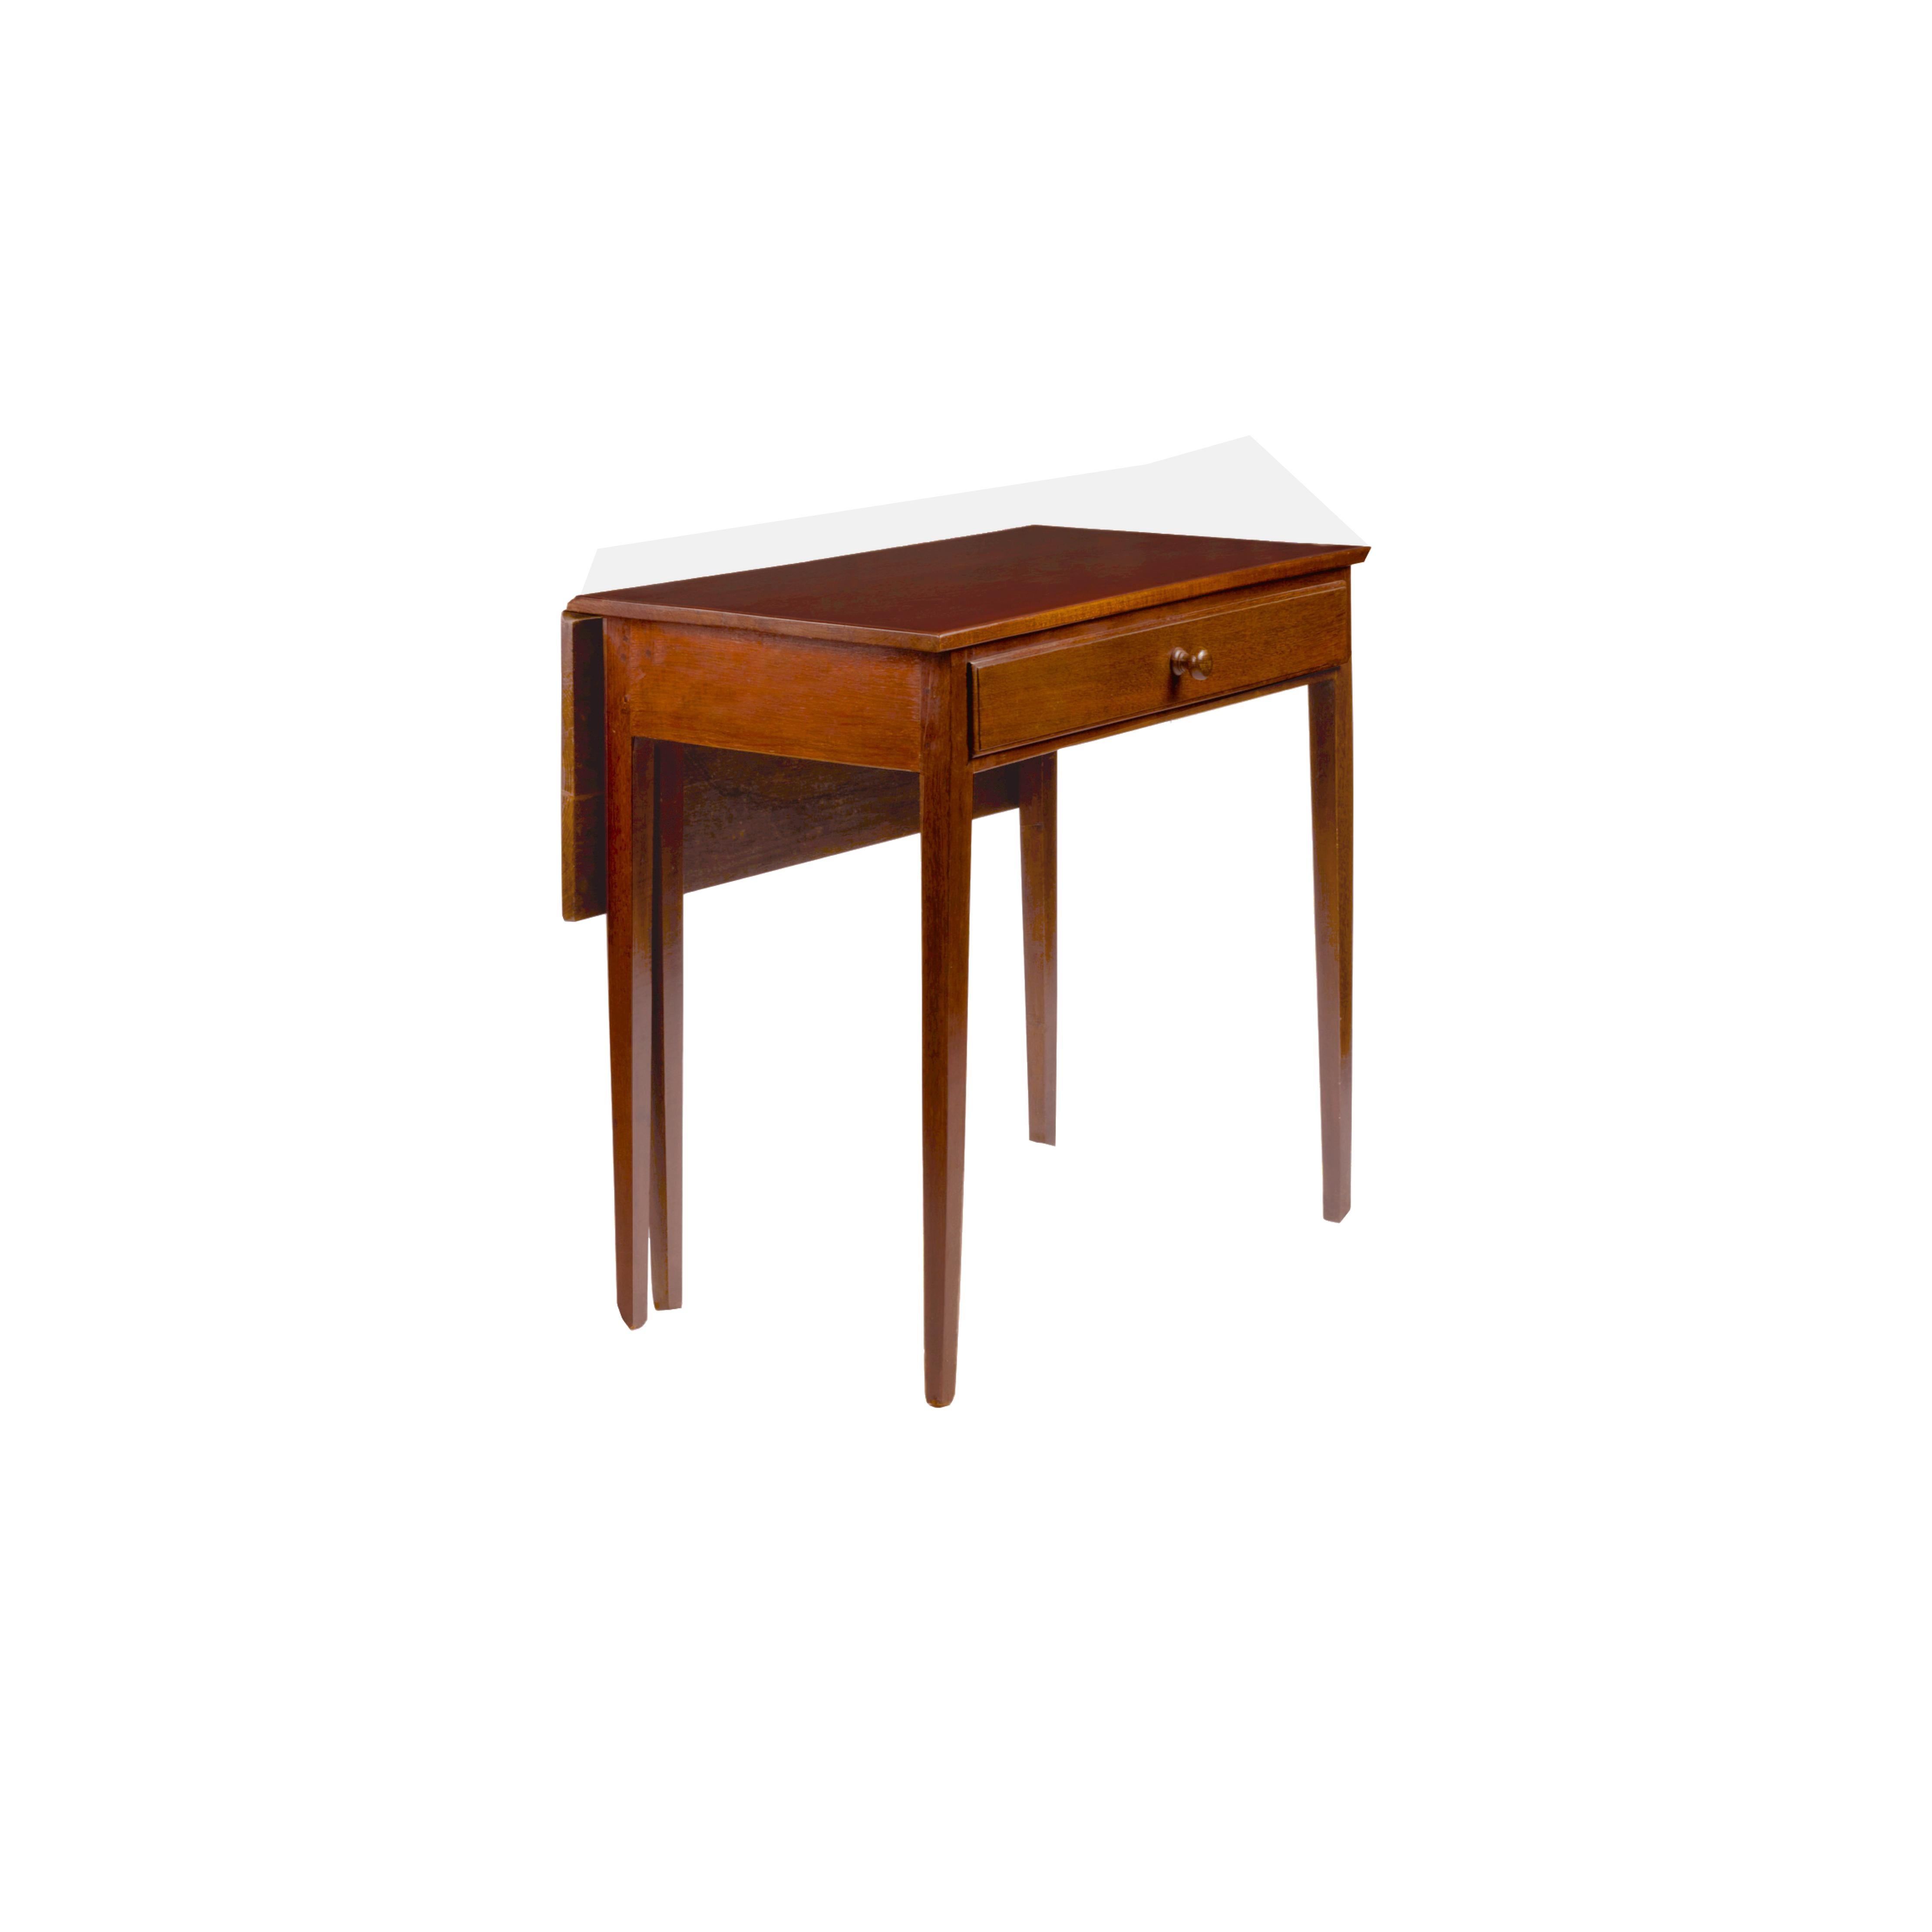 19th Century Mahogany Drop Leaf Table In Good Condition For Sale In Lisbon, PT